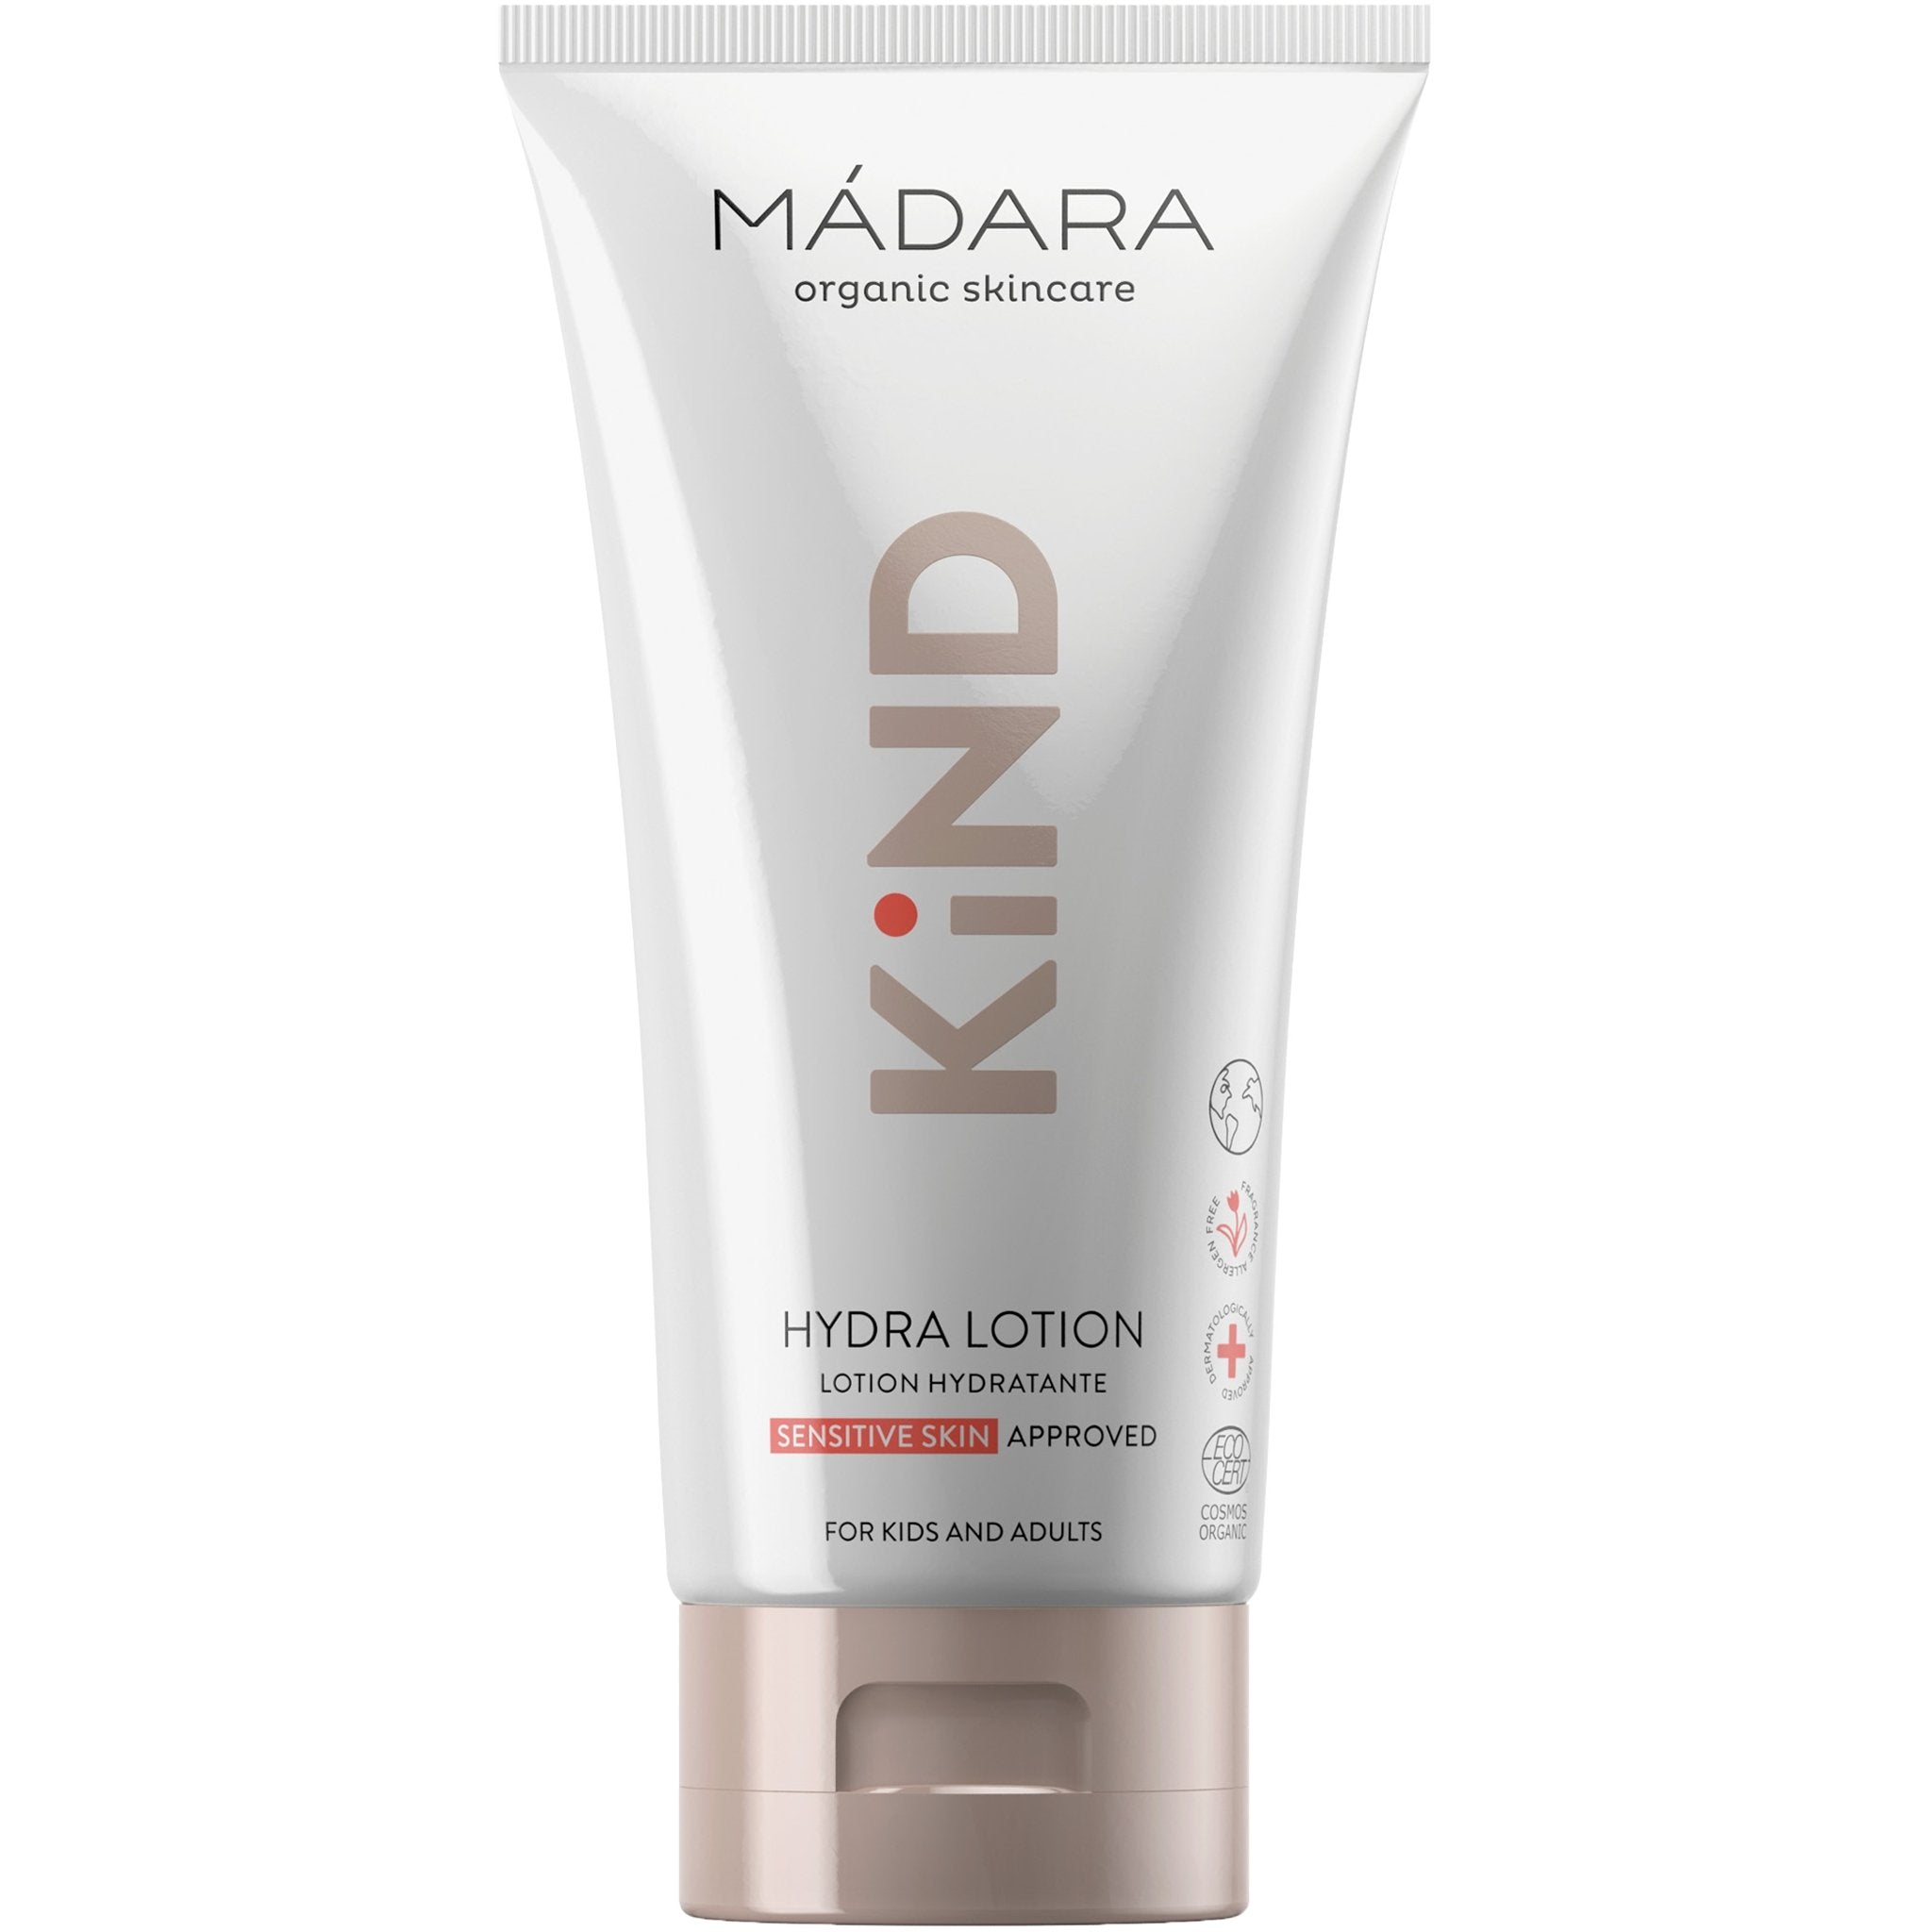 NEW KIND Hydra Lotion - mypure.co.uk